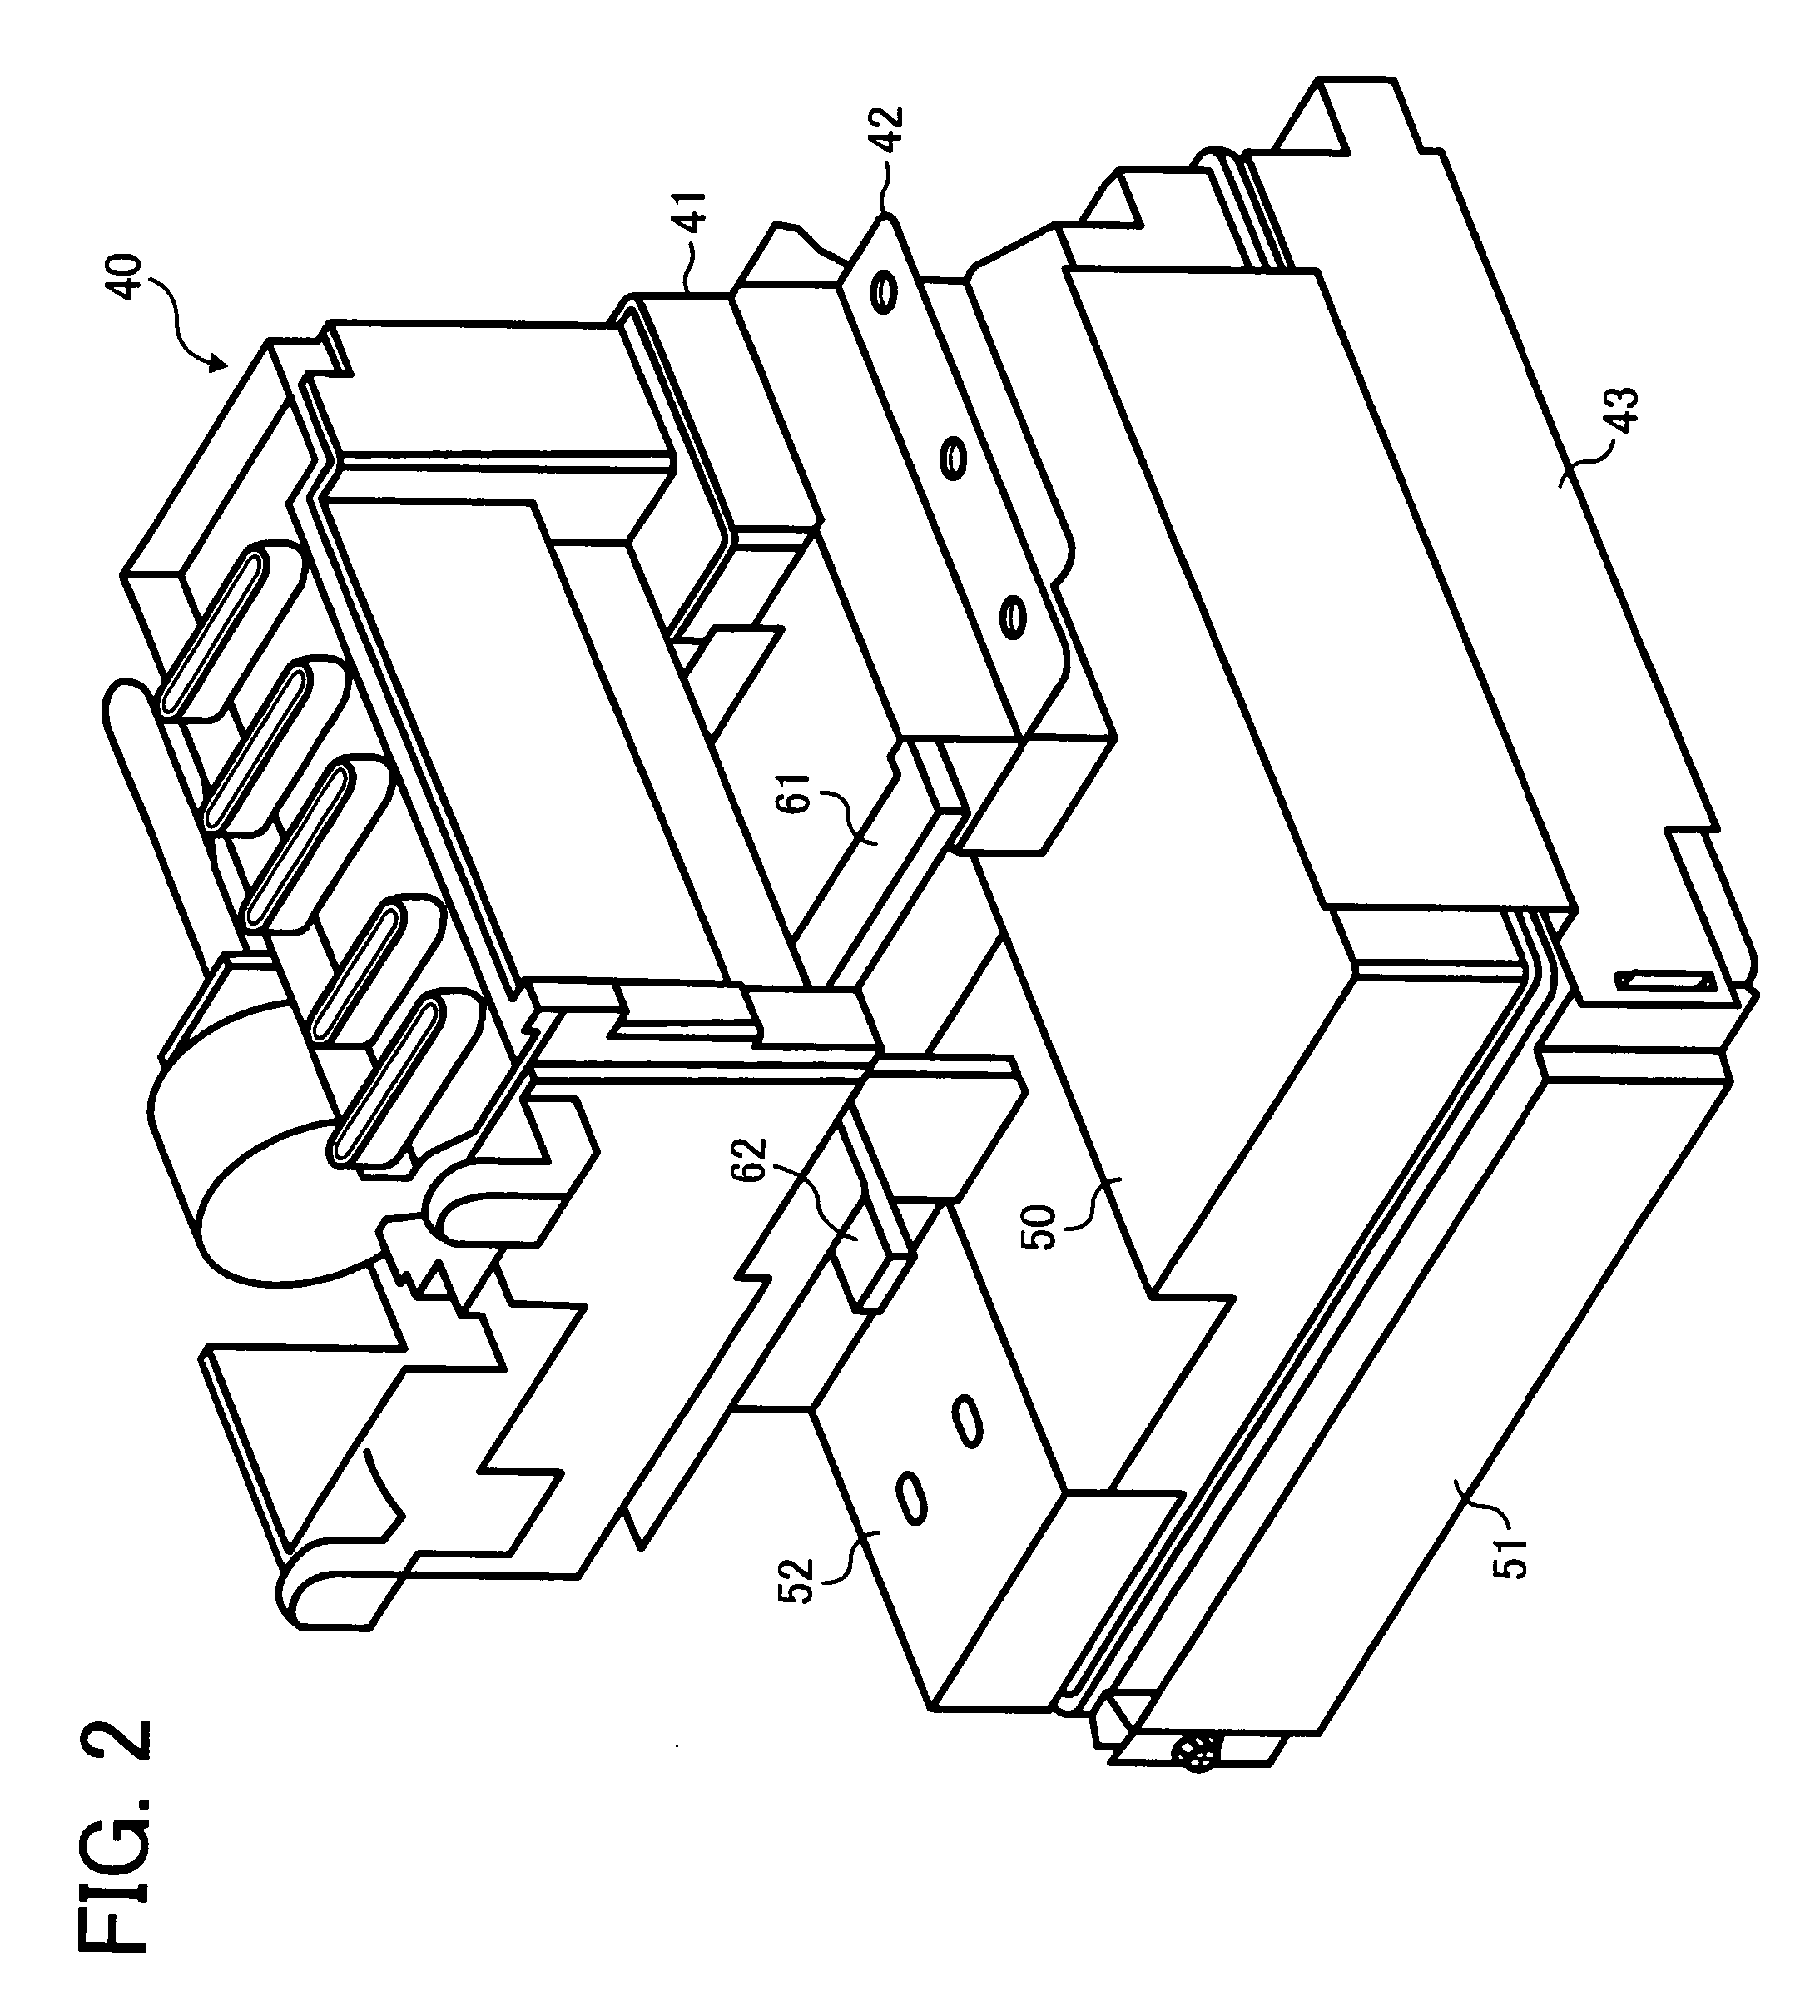 Ink jet recording apparatus with higher flexibility in layout of components